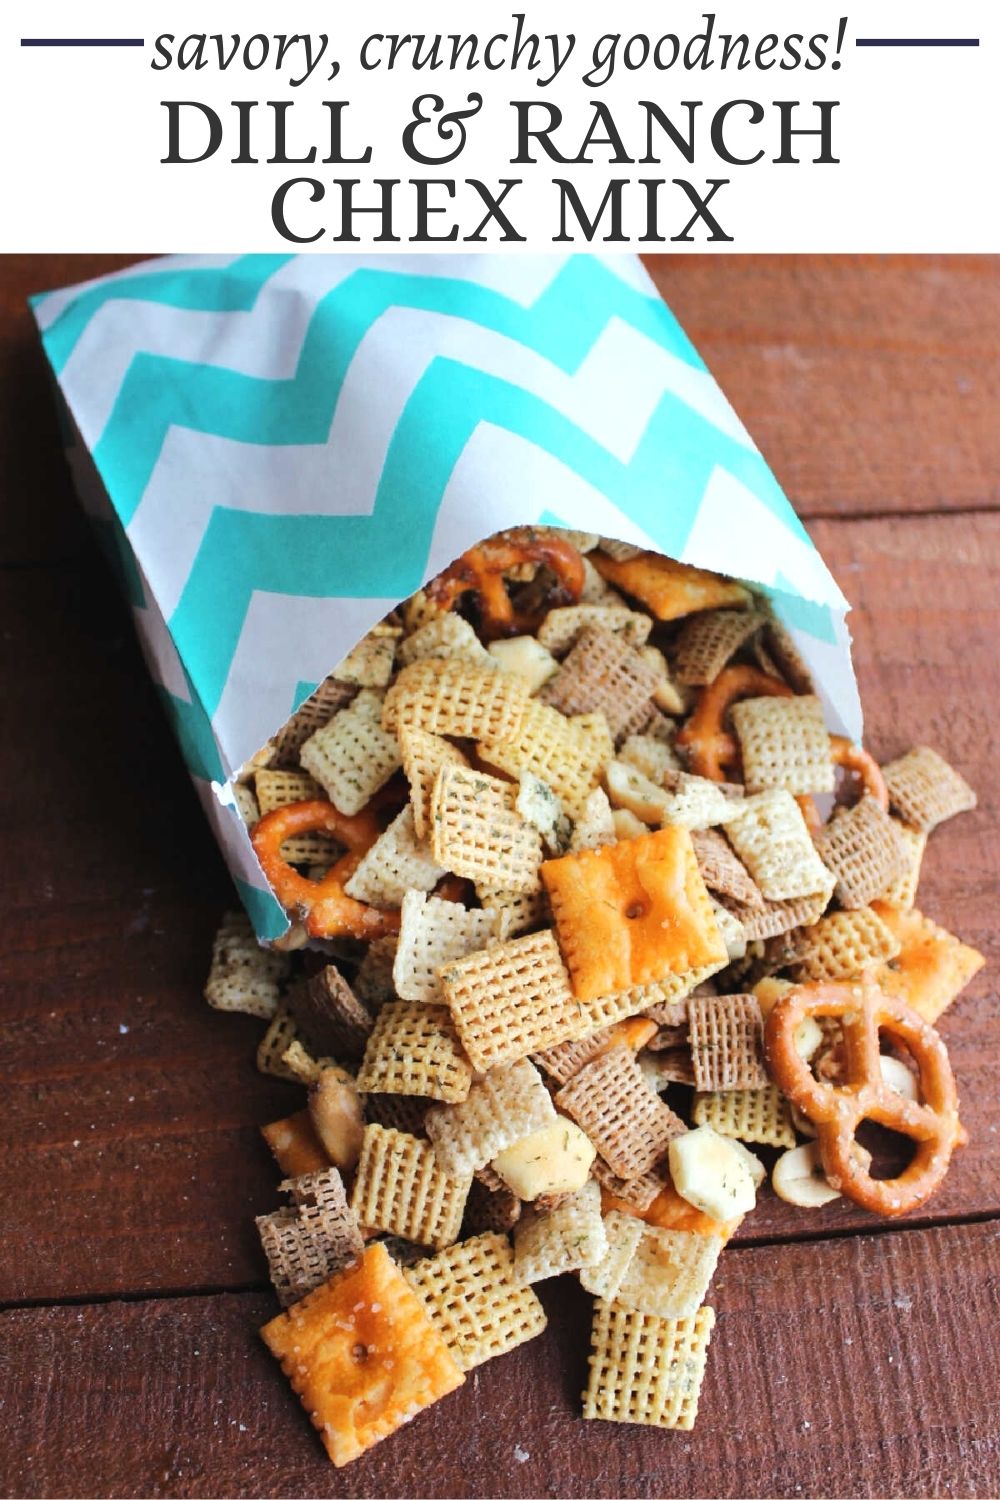 If savory snack mixes are your thing, you are in luck! This fun munchy mix is loaded with different shapes, textures and flavors. The dill and ranch coating makes it different than traditional chex mix in the best kind of way.  Serve it at a party, movie night or after school snack!